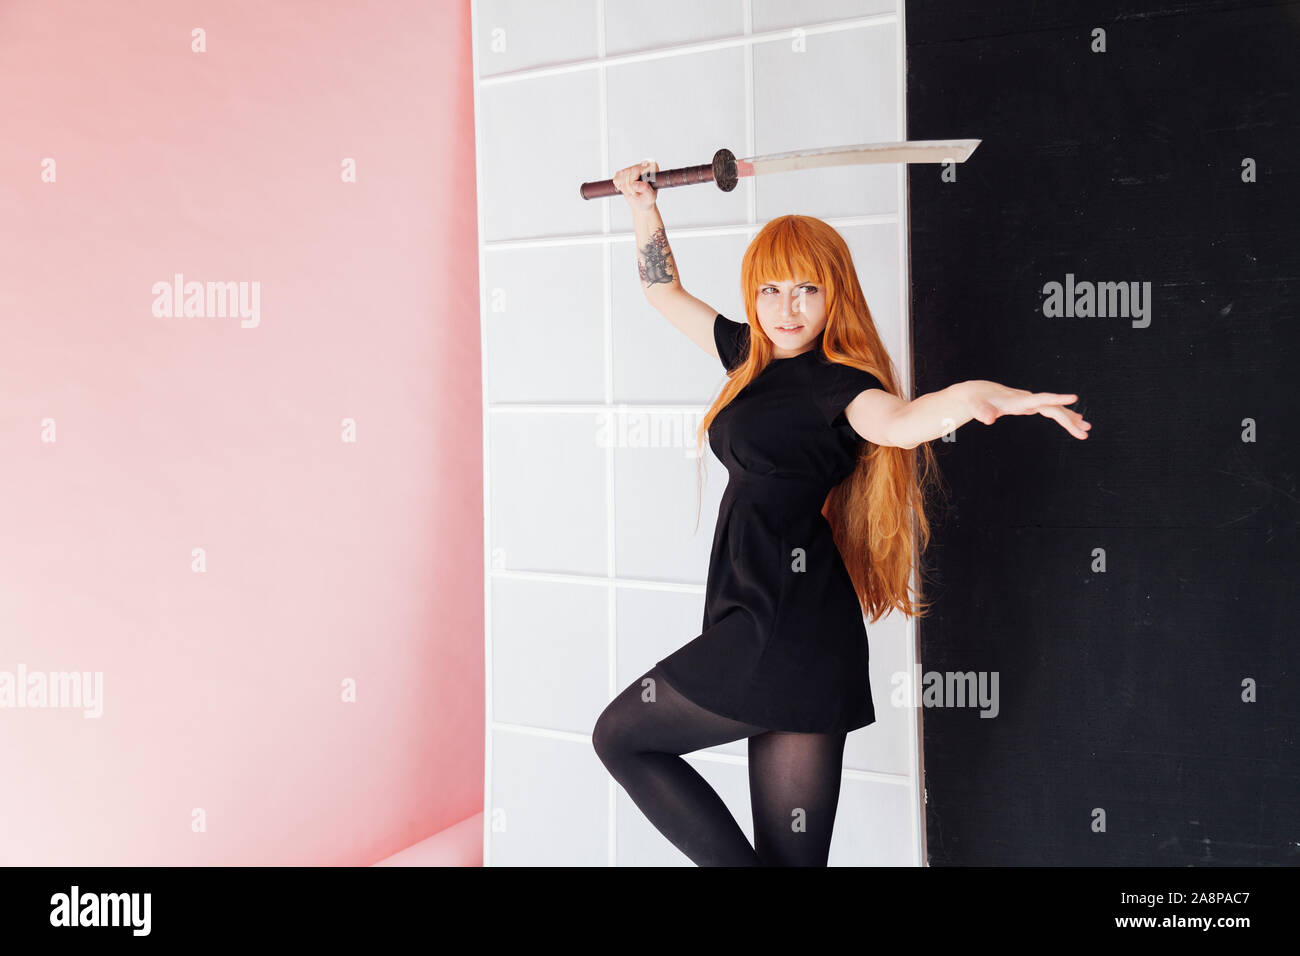 woman anime cosplayer with red hair Japanese sword Stock Photo